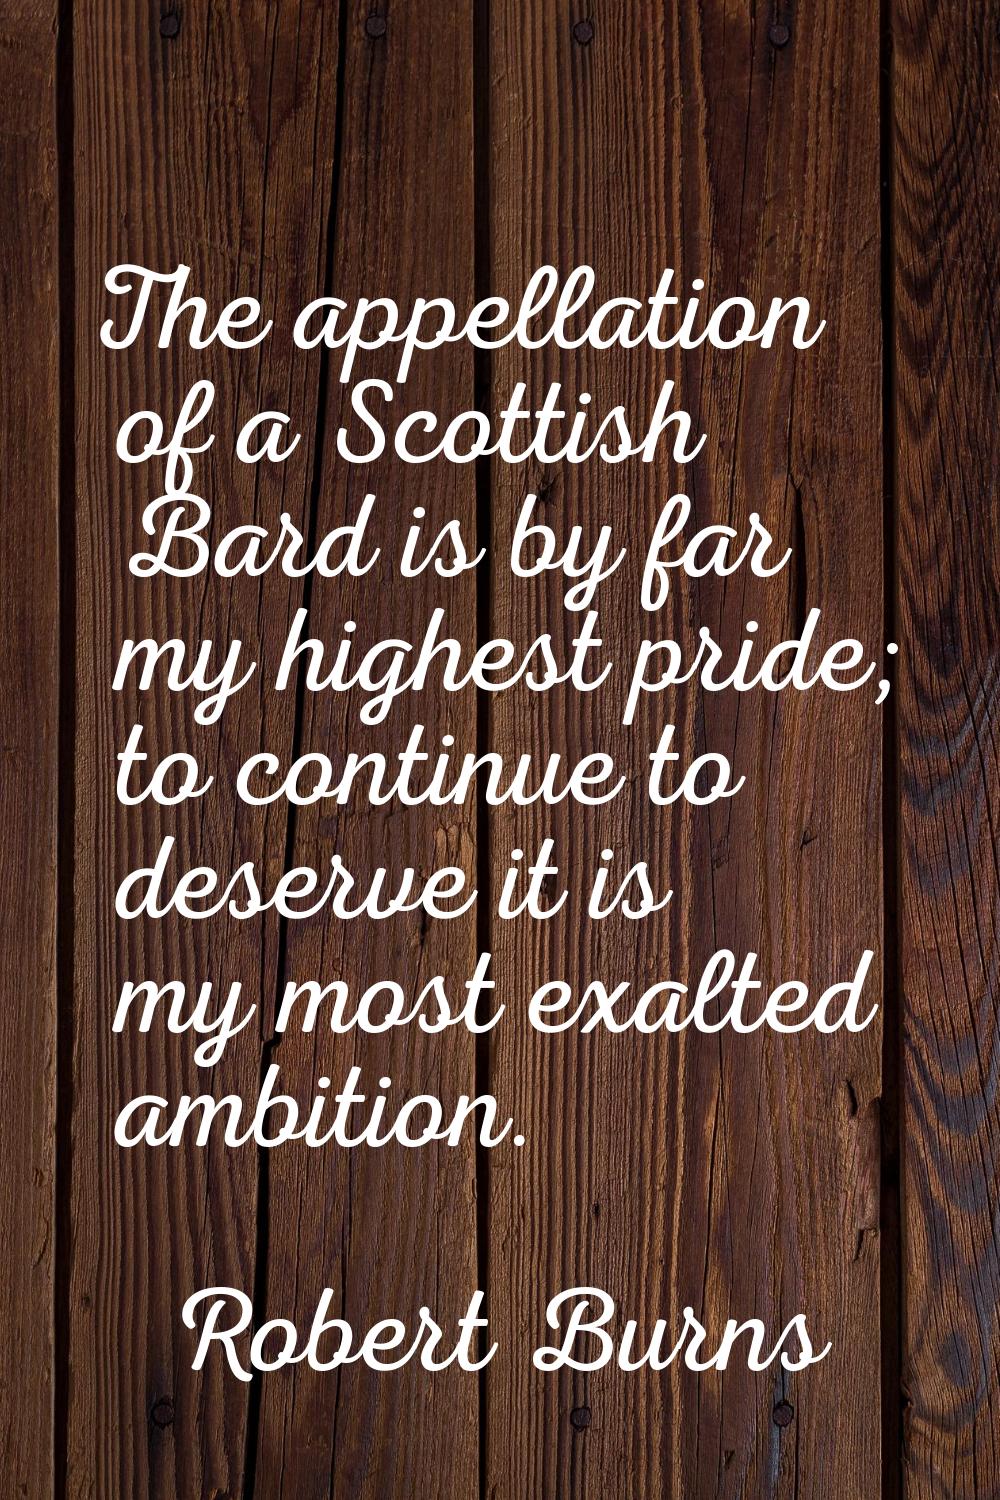 The appellation of a Scottish Bard is by far my highest pride; to continue to deserve it is my most